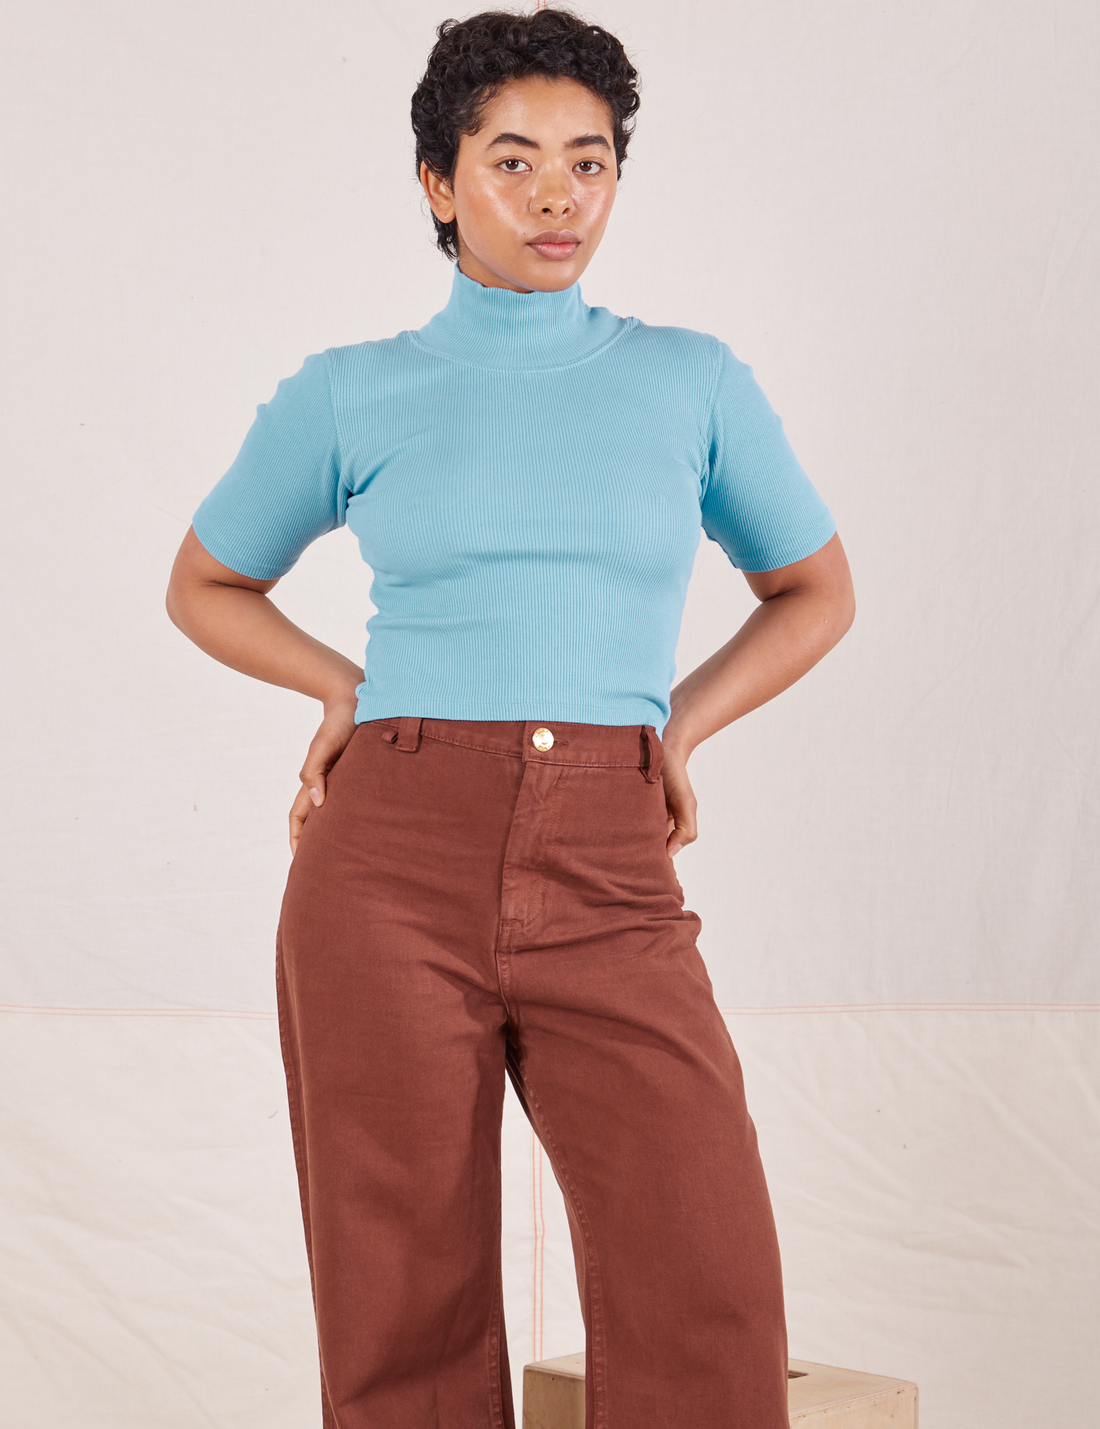 1/2 Sleeve Essential Turtleneck in Baby Blue on Mika wearing fudgesicle brown Bell Bottoms